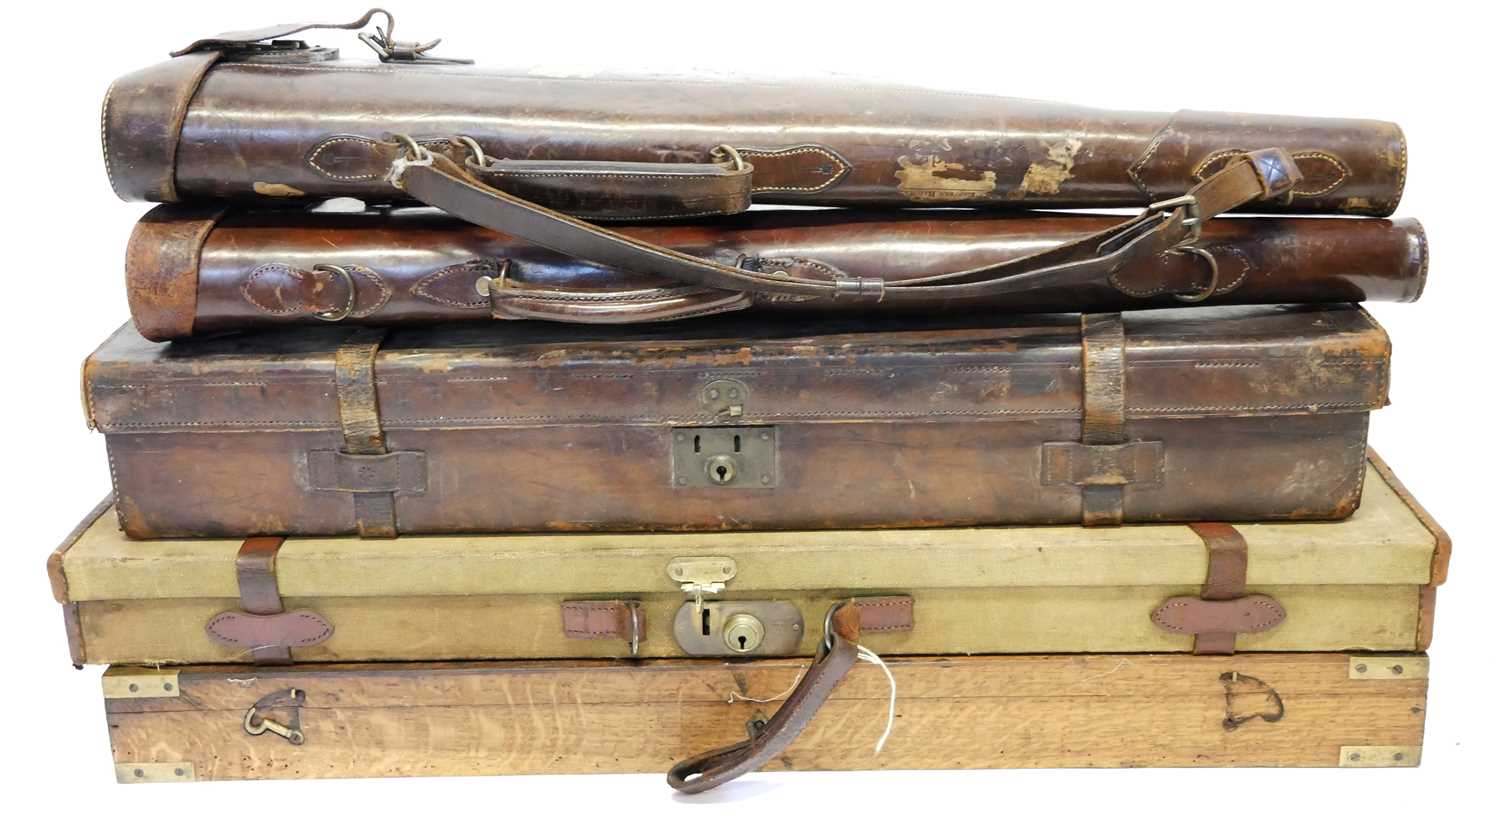 Five gun cases, to include an oak and brass case (no interior) a canvas and leather case, an all